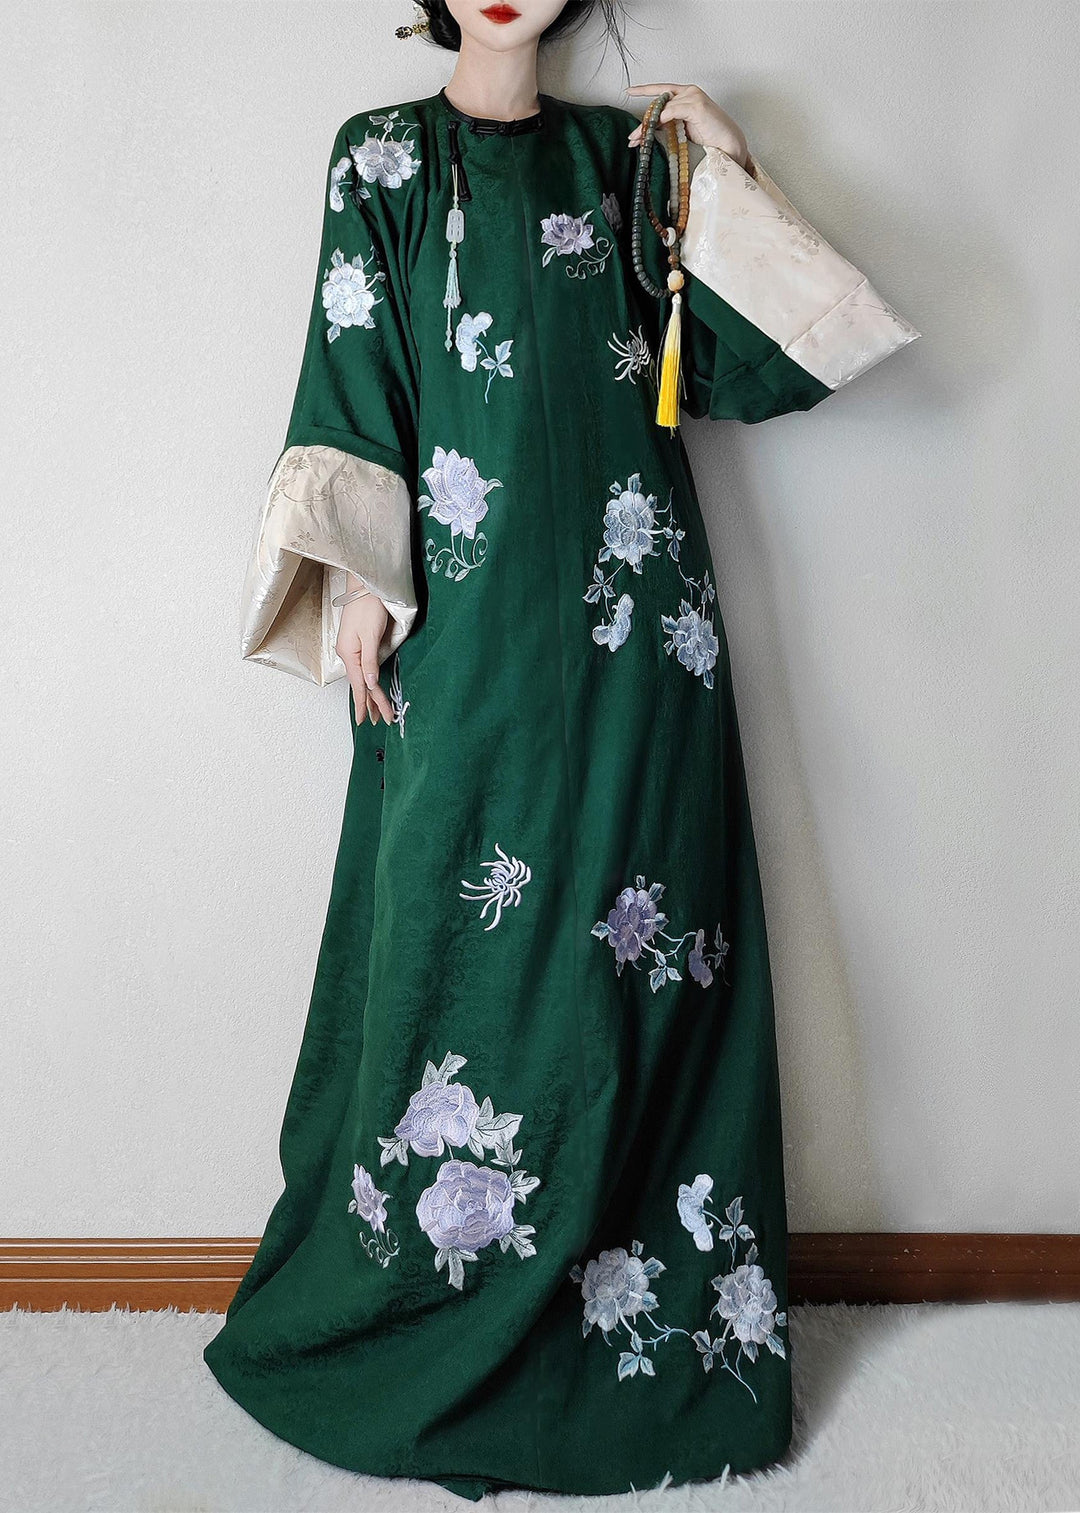 Jacquard Green Embroidered Button Silk Maxi Dresses Long Sleeve